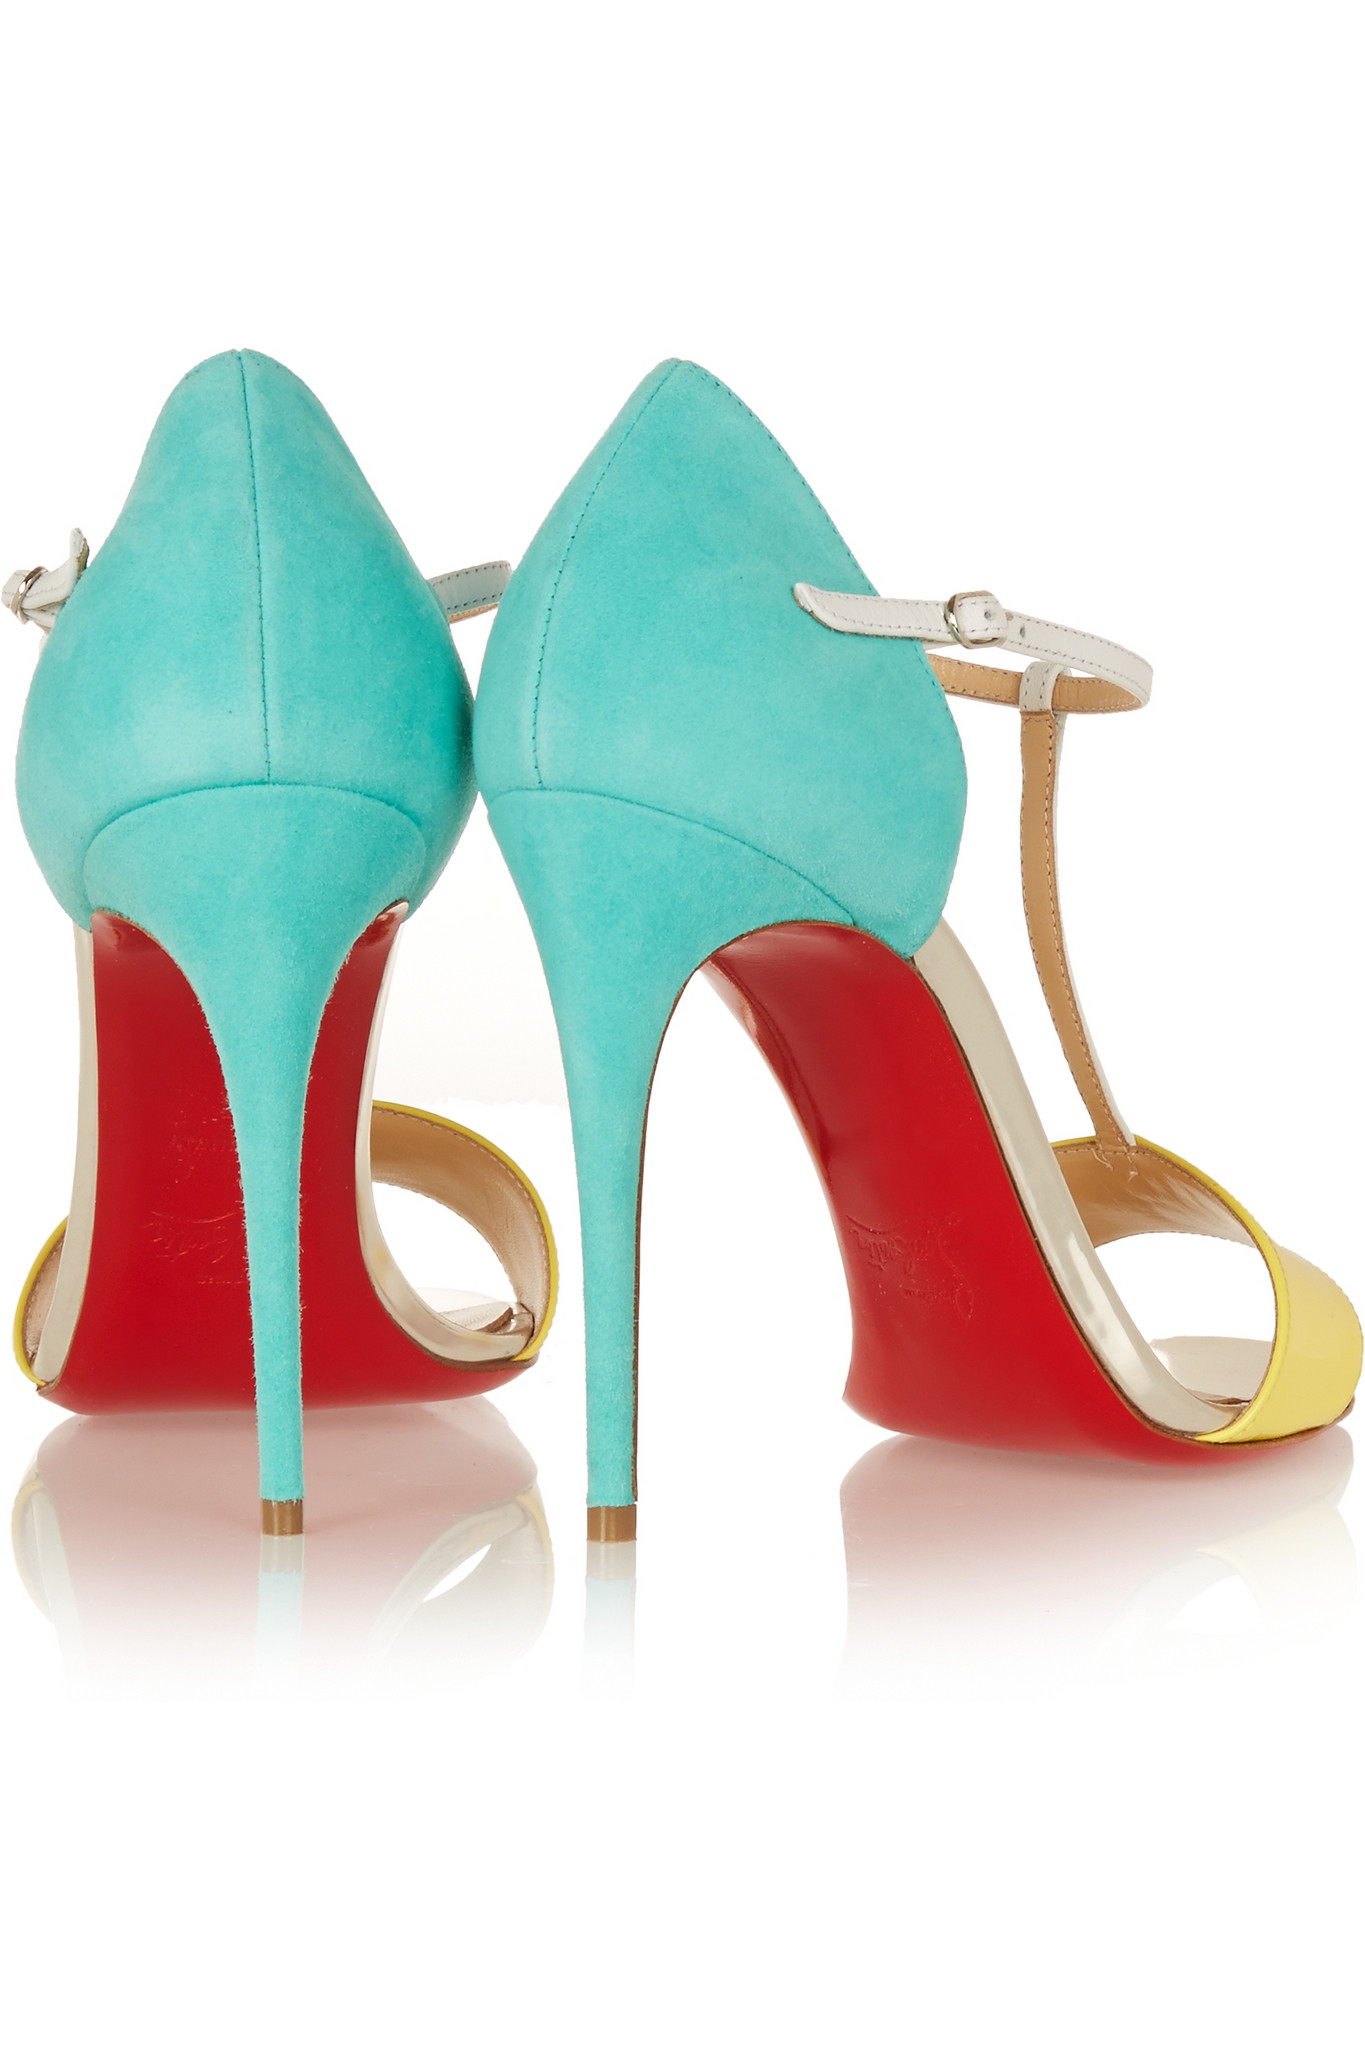 Christian louboutin True Blue Leather and Suede T-Bar Sandals in ...  